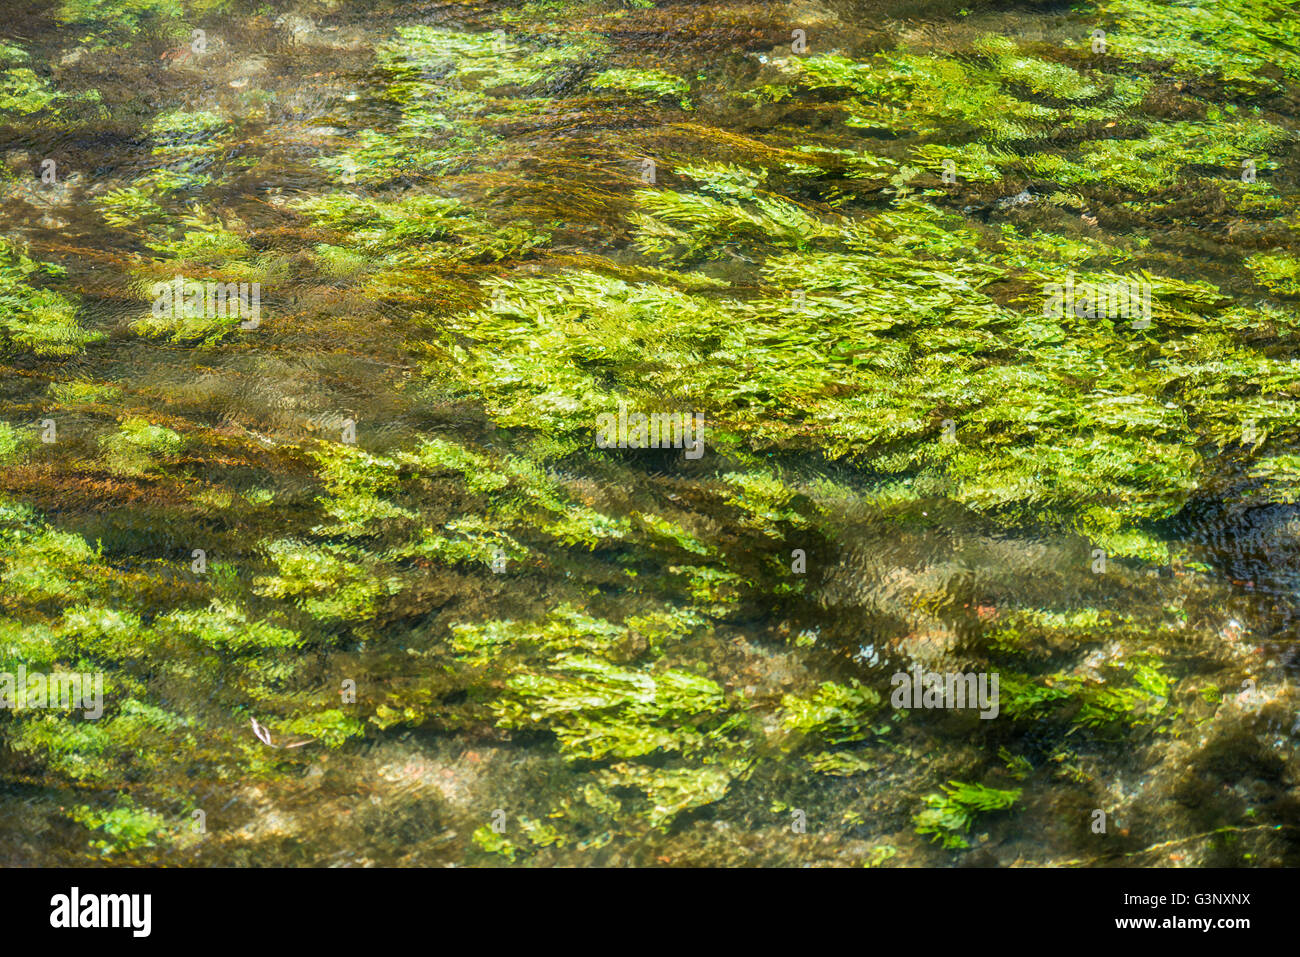 Green juicy water plants are waved underwater at a small rapid stream looks like painting Stock Photo